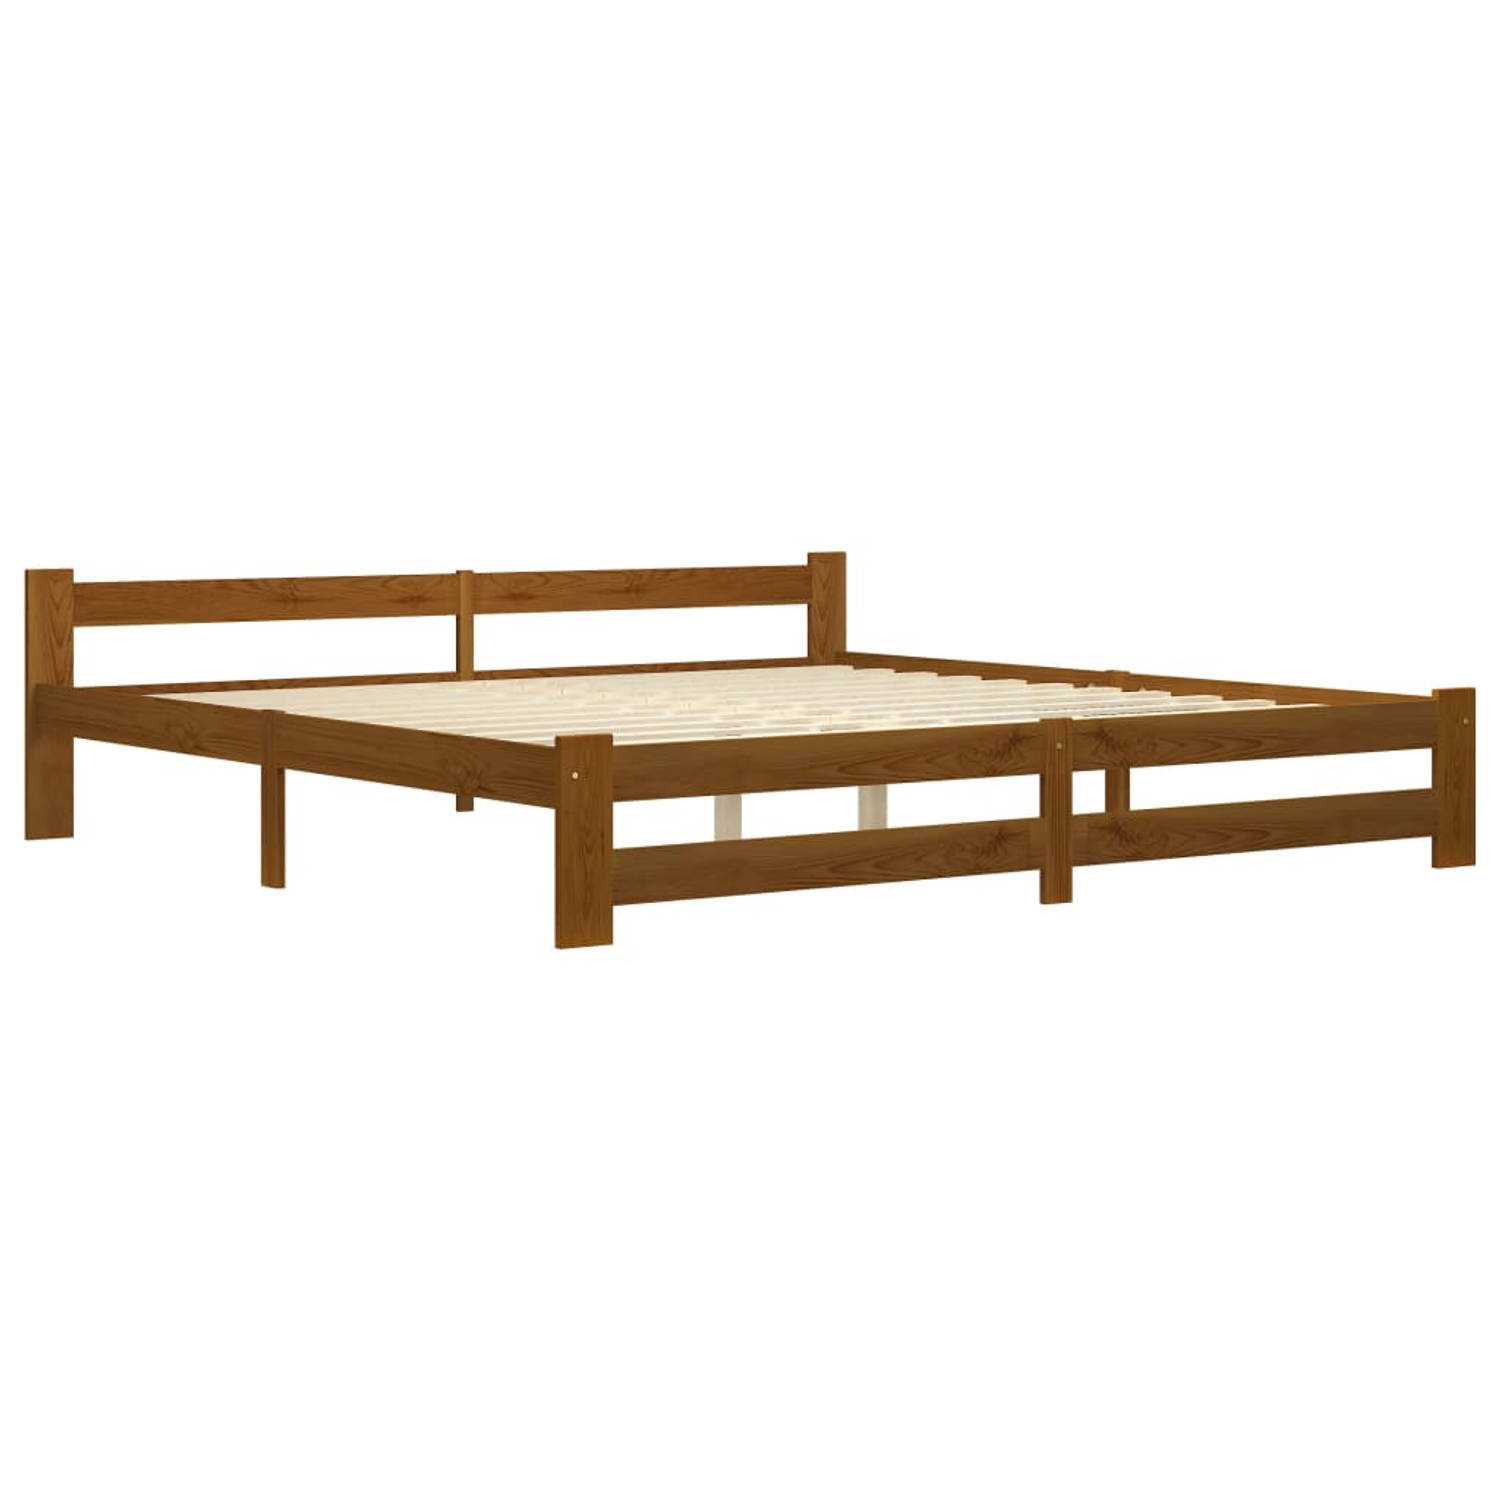 The Living Store Bedframe massief grenenhout honingbruin 200x200 cm - Bedframe - Bedframes - Bed Frame - Bed Frames - Bed - Bedden - Houten Bedframe - Houten Bedframes - 2-persoons